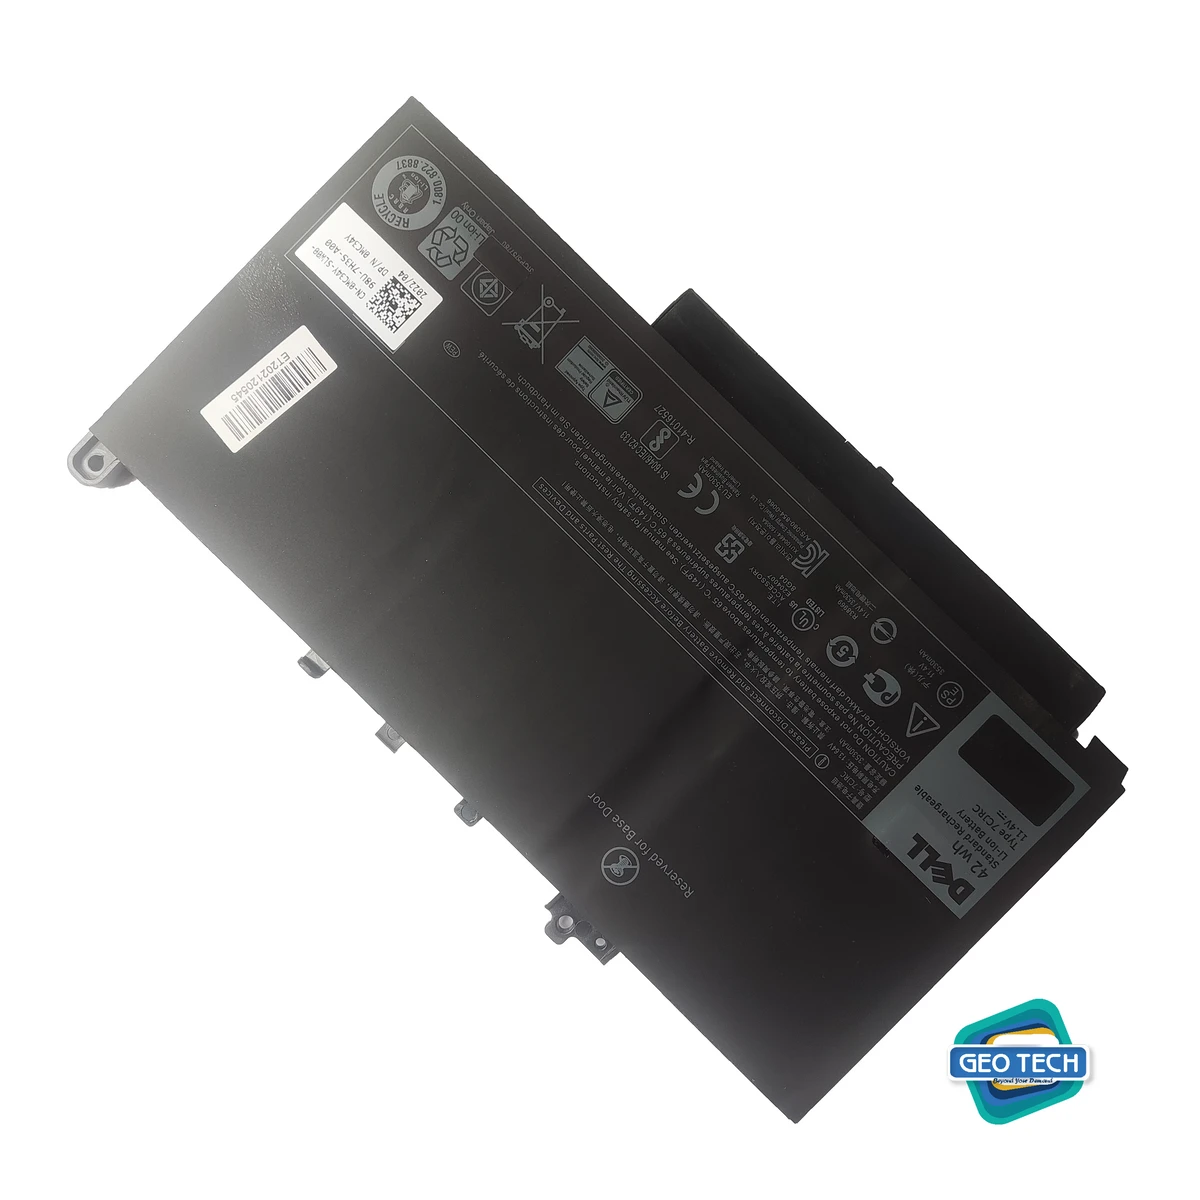 DELL  7CJRC Laptop Battery Compatible with Dell Latitude 7470 7270 E7470 E7270 Series Notebook KNM09 0KNM09 21X15 021X15 [11.4V 42Wh 3500mAh 3-Cell 7CJRC]